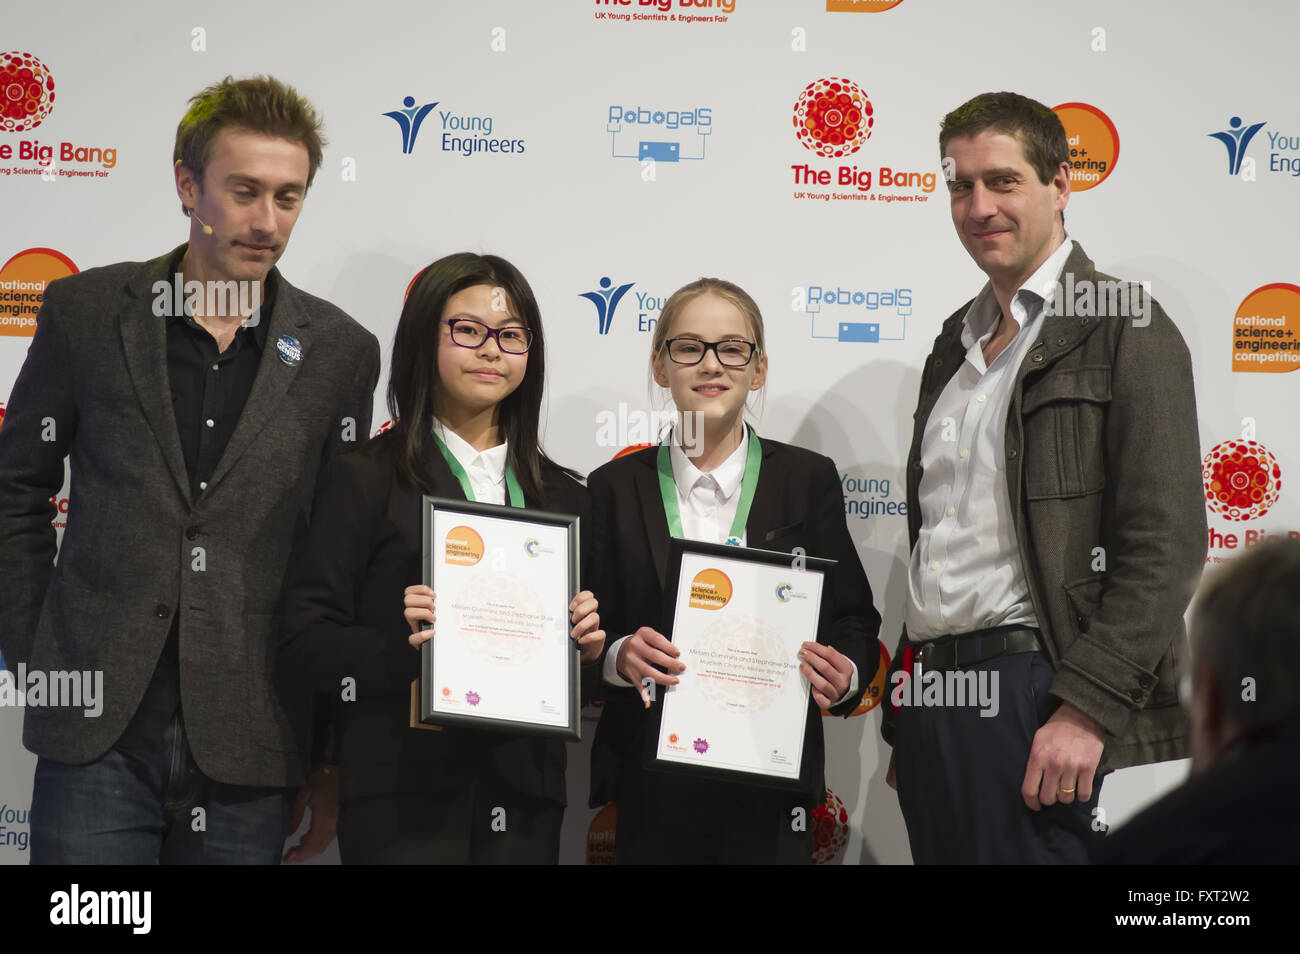 The 2016 Big Bang UK Young Scientists and Engineers Fair - Day 2 - Winners  Featuring: The Royal Society of Chemistry Prize, Miriam Cummins, Stephanie Shek from Morpeth Chantry Middle School Where: Birmingham, United Kingdom When: 17 Mar 2016 Stock Photo